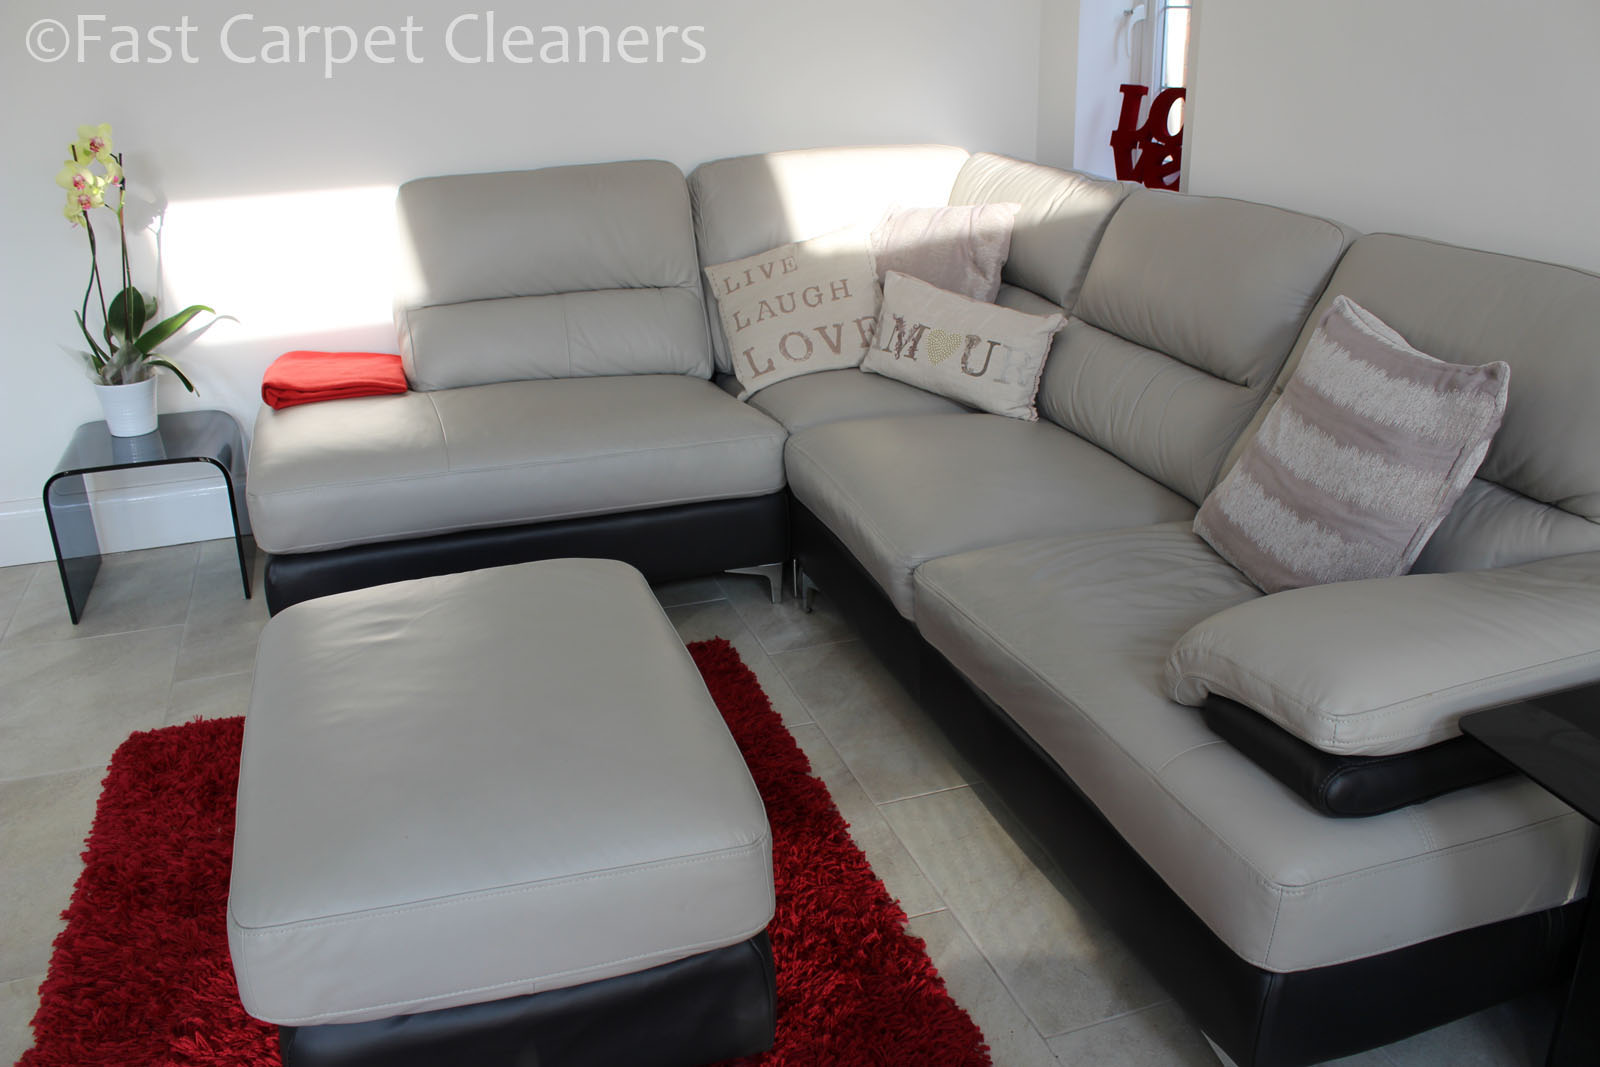 Upholstery-Cleaning-Staines